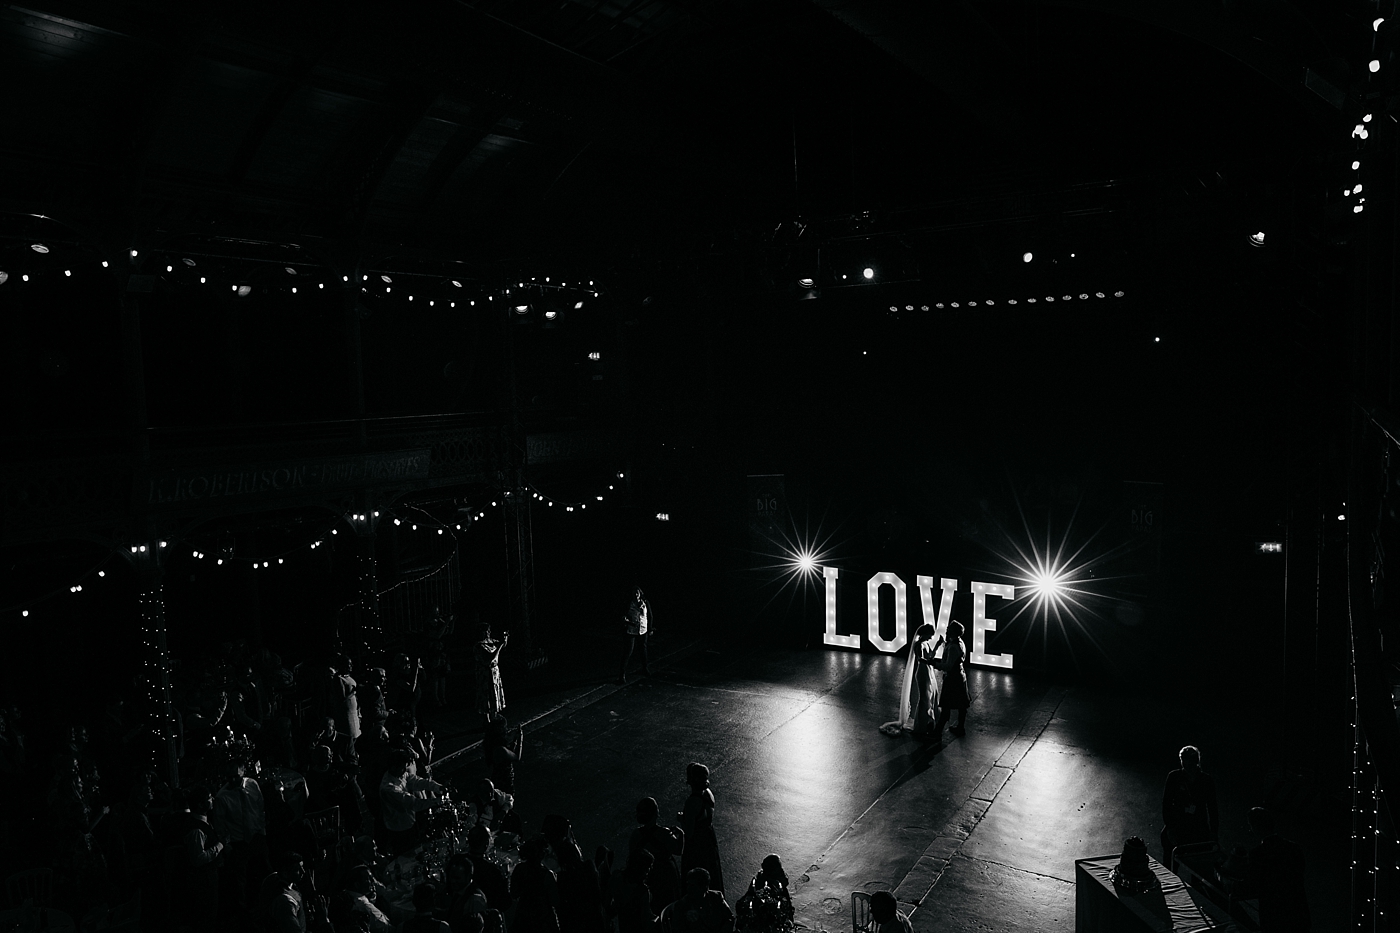 planning your wedding party timeline - first dance image from the Fruitmarket, Glasgow